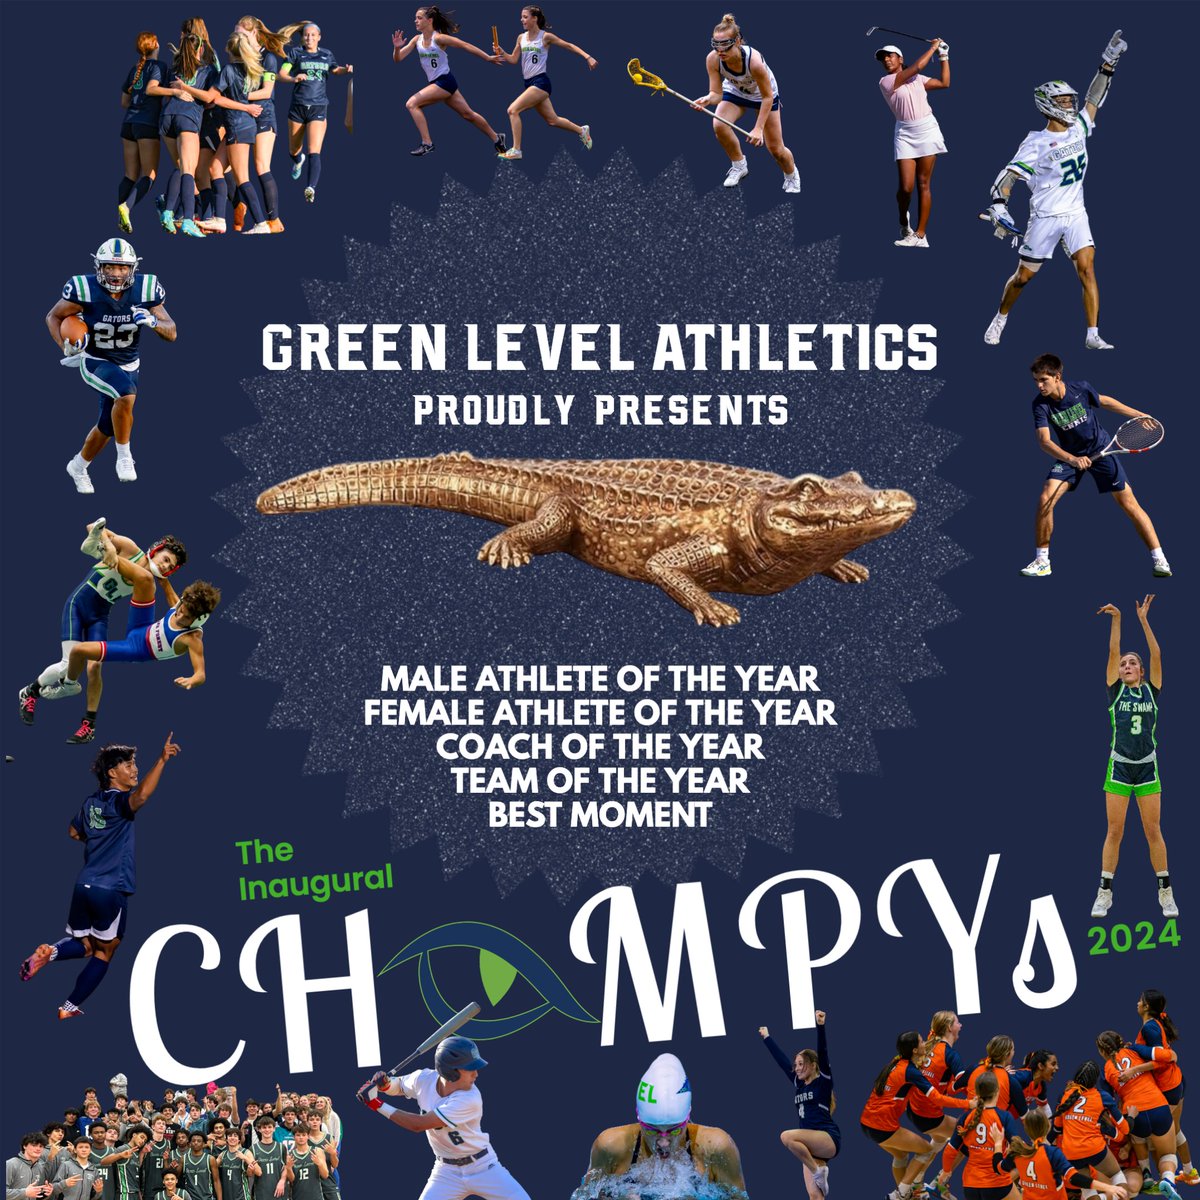 ICYMI... We've created a new @G_L_ATHLETICS end-of-the-year awards ceremony -- the #CHOMPYs! We'll reveal the nominees later this week, and then students/teachers/players/coaches will be able to vote on the winners. We'll then present the trophies at the end of May!